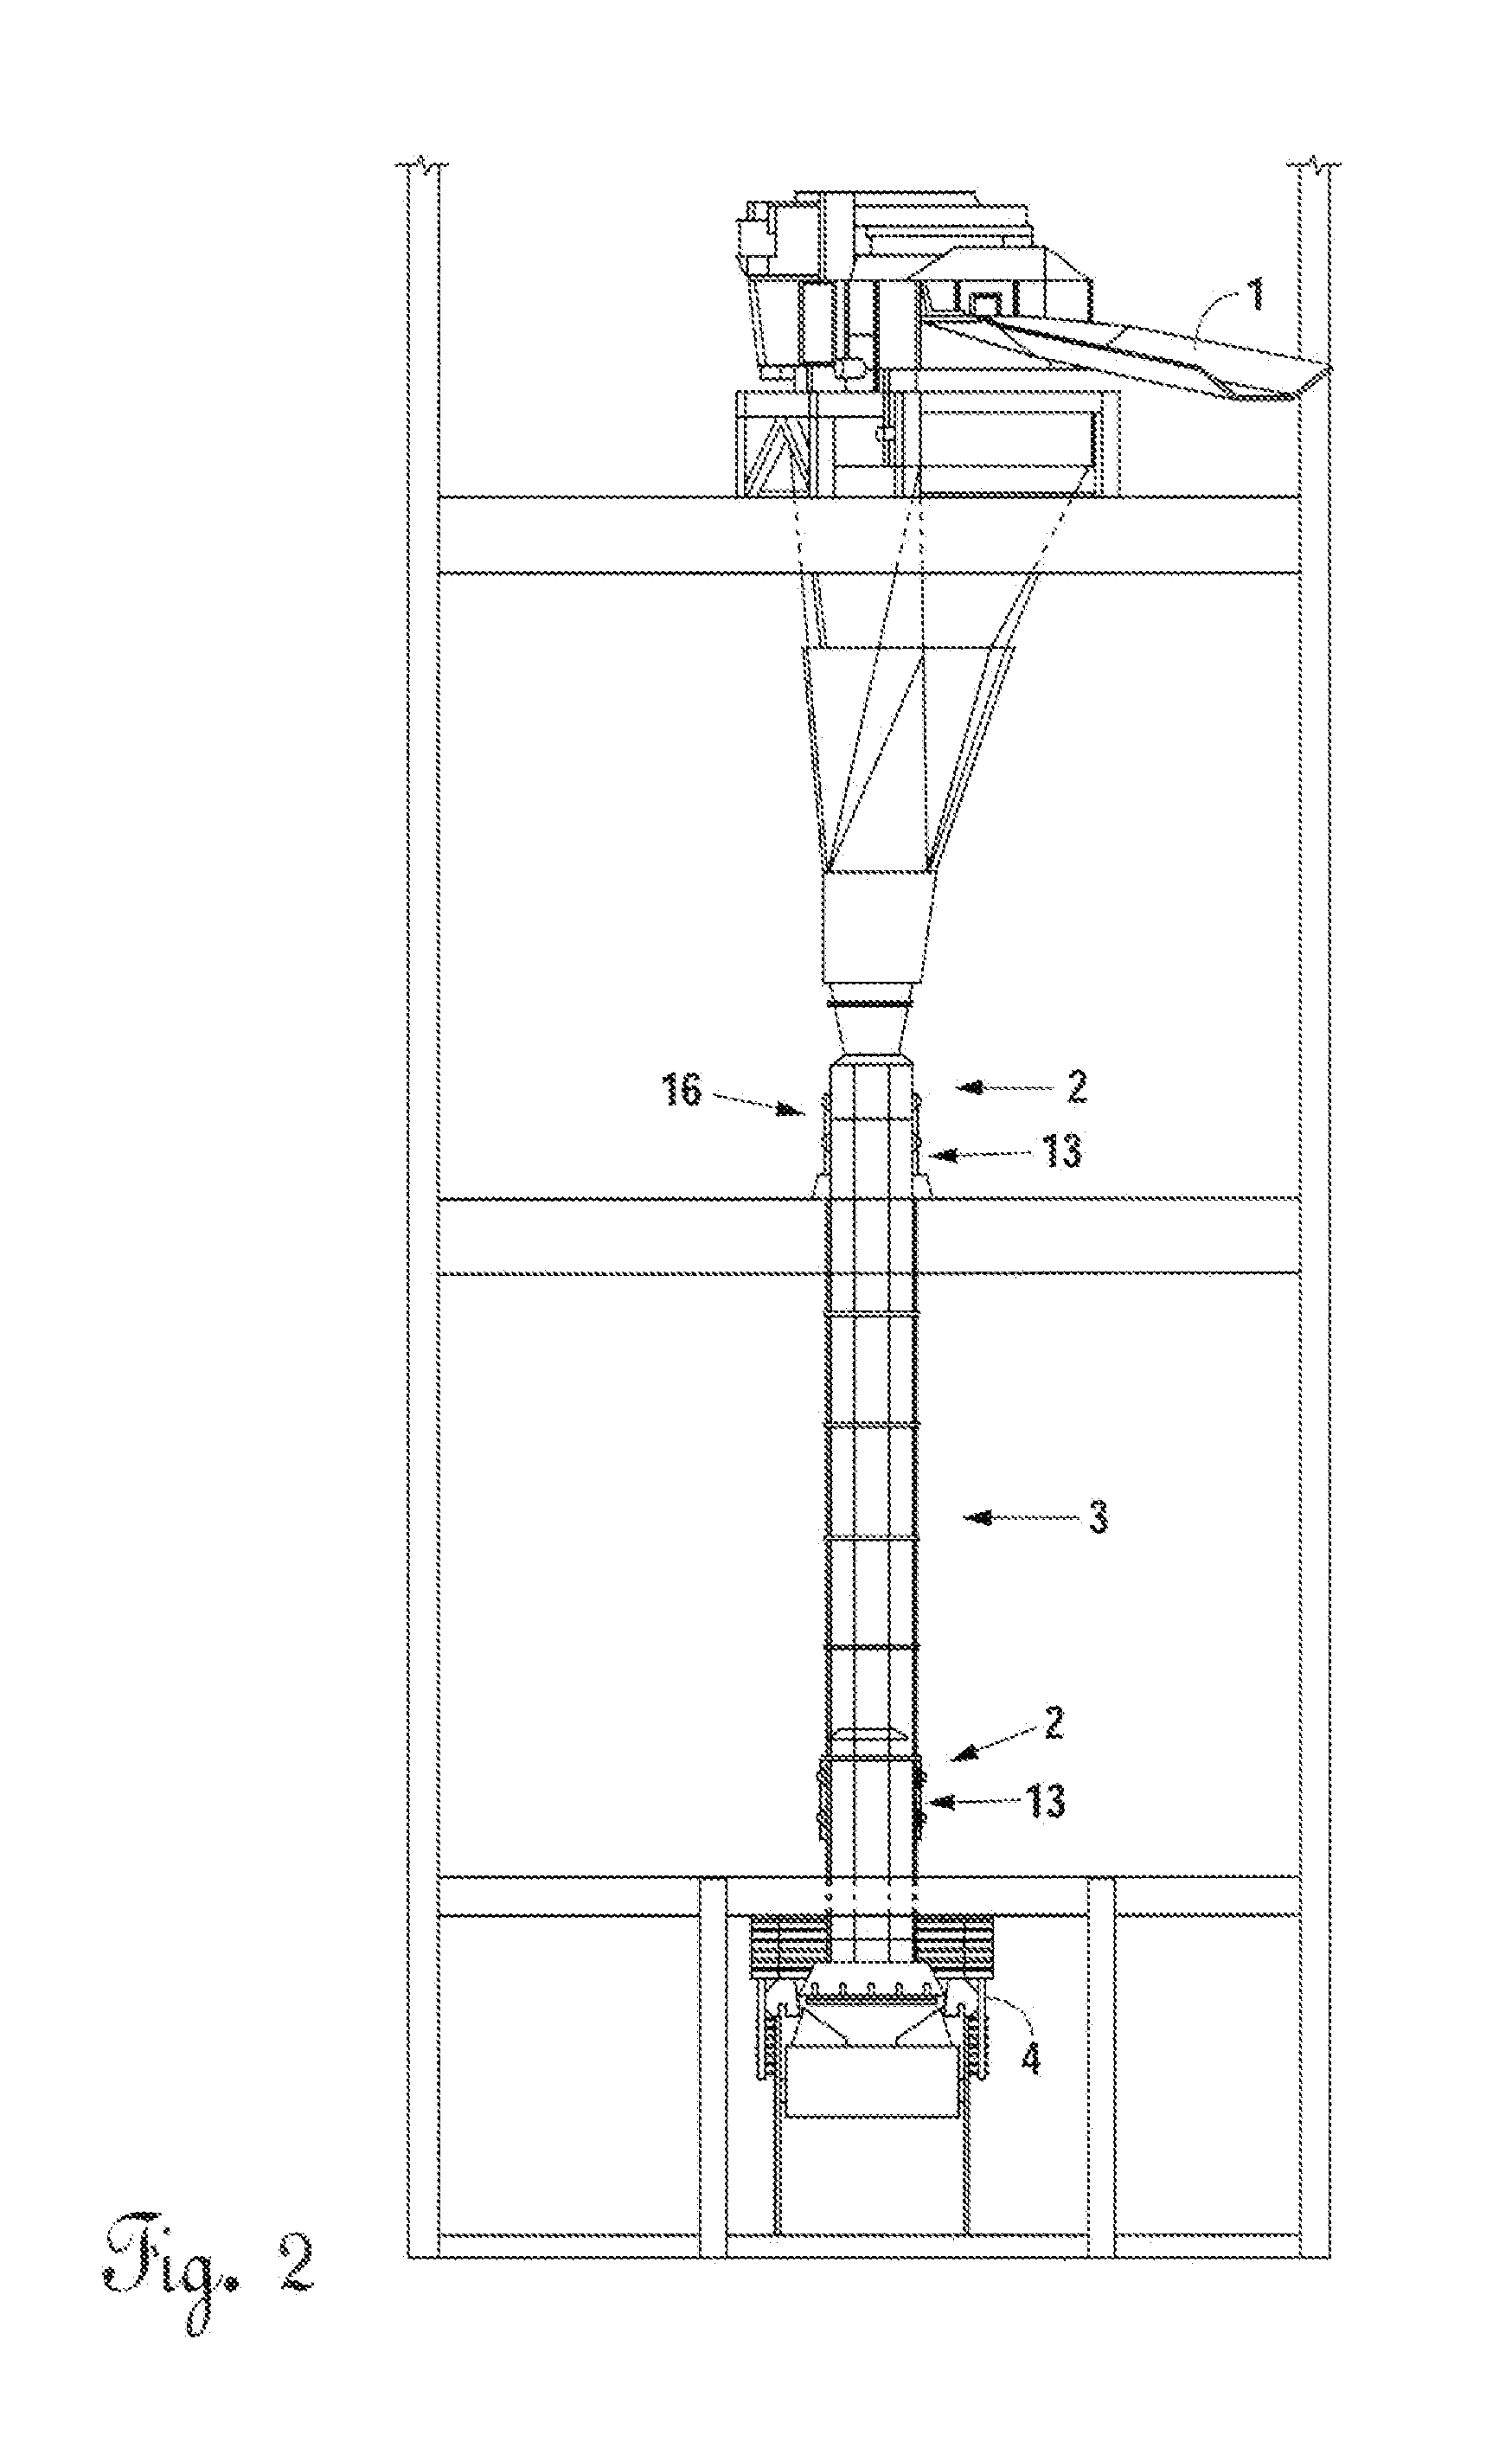 Apparatus and Method for Passive Dust Control in a Transfer Chute